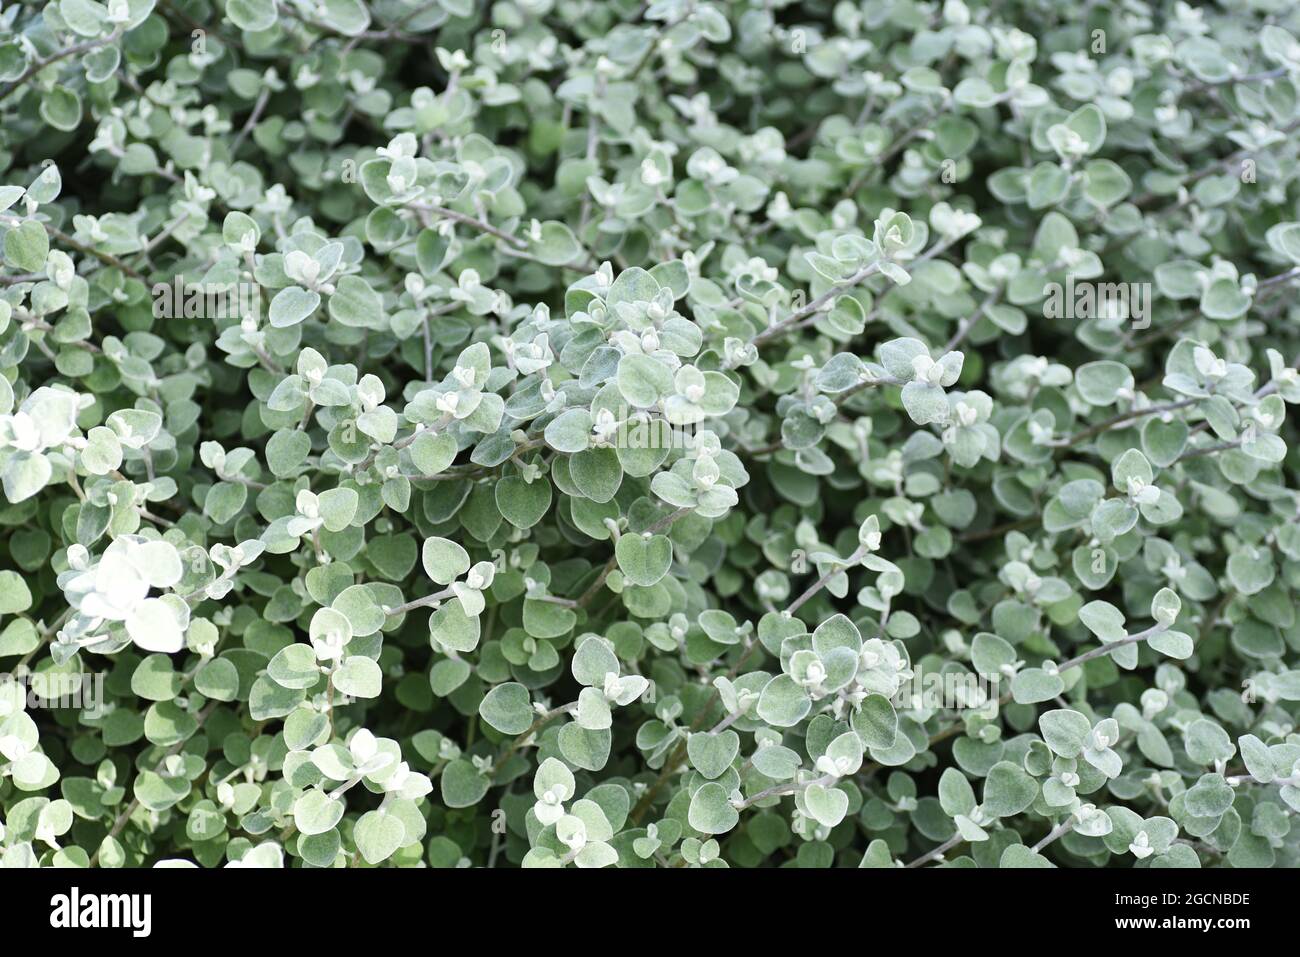 Licorice plant with small leaves in a garden Stock Photo